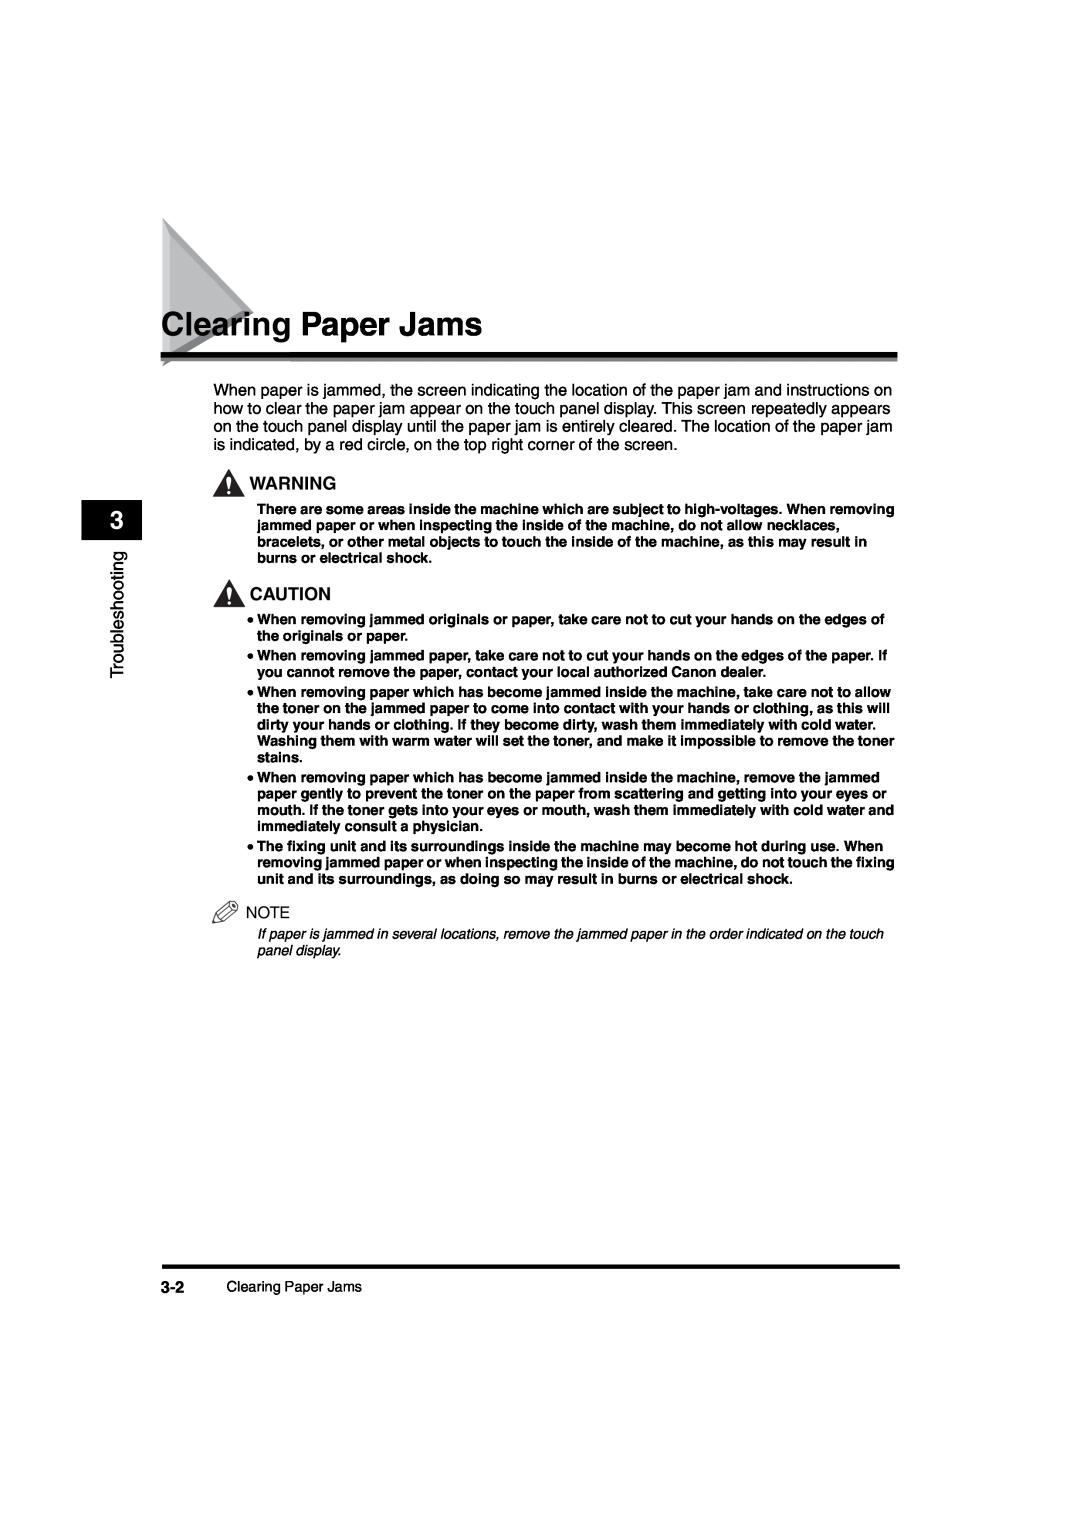 Canon iR6570 manual Clearing Paper Jams, Troubleshooting 